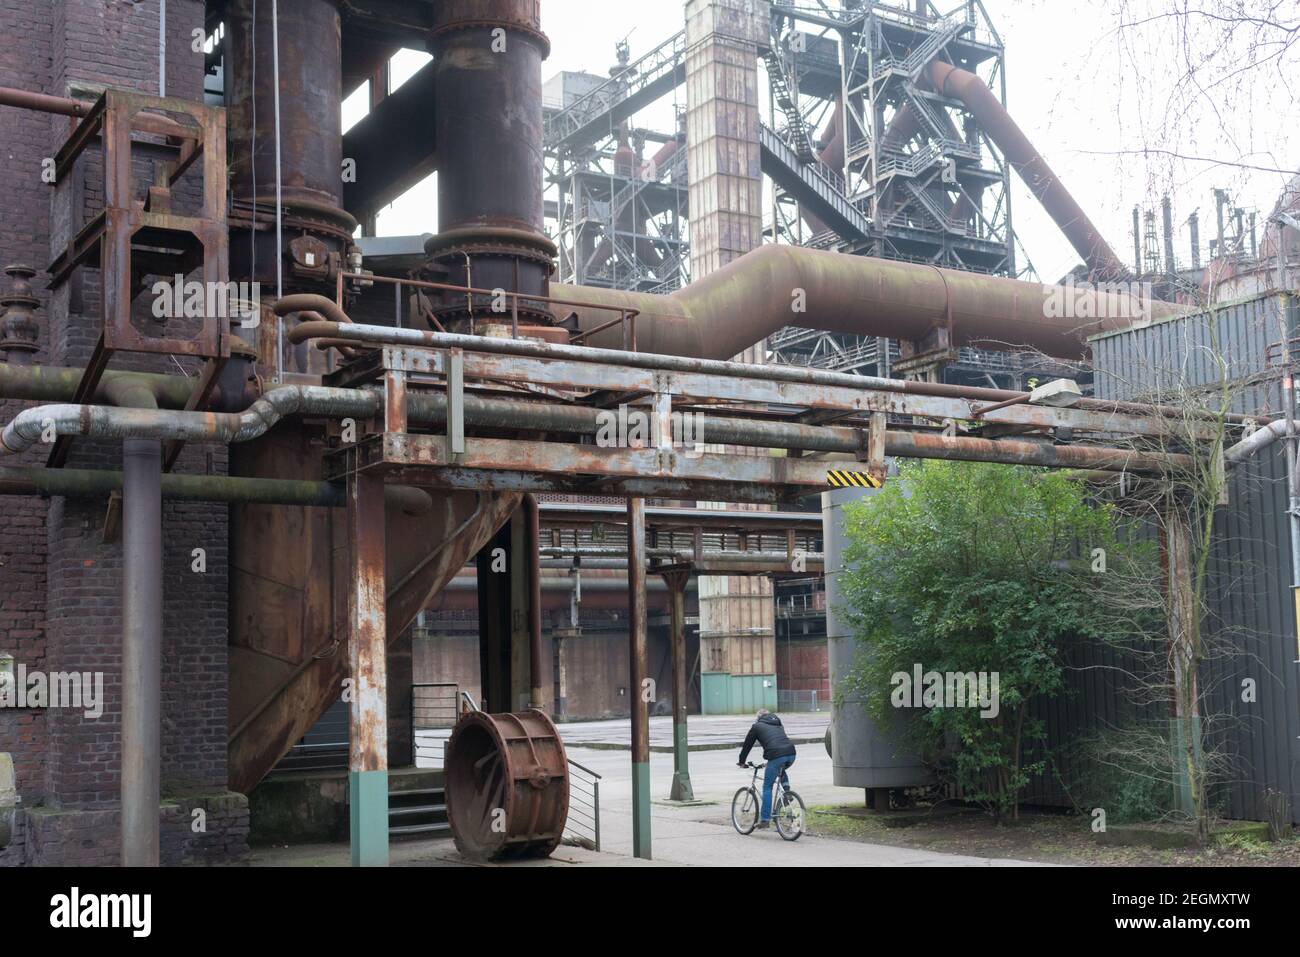 Landschaftspark Duisburg-Nord is a public park where visitors can explore a coal and iron works site that was closed down in 1985. It was transformed Stock Photo